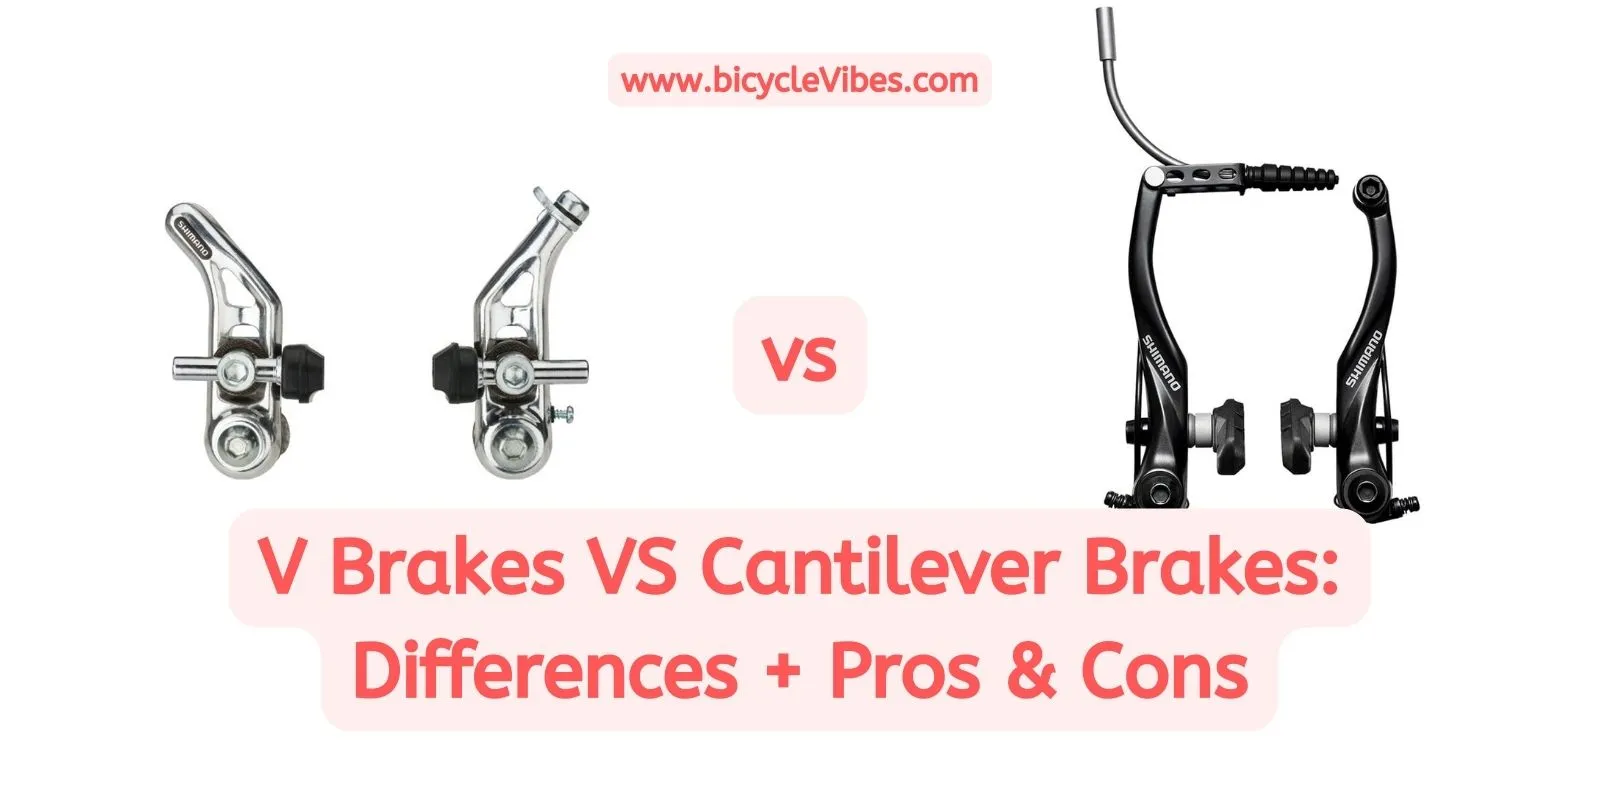 V brakes vs cantilever brakes - 4 areas to learn what brakes are best for  you 